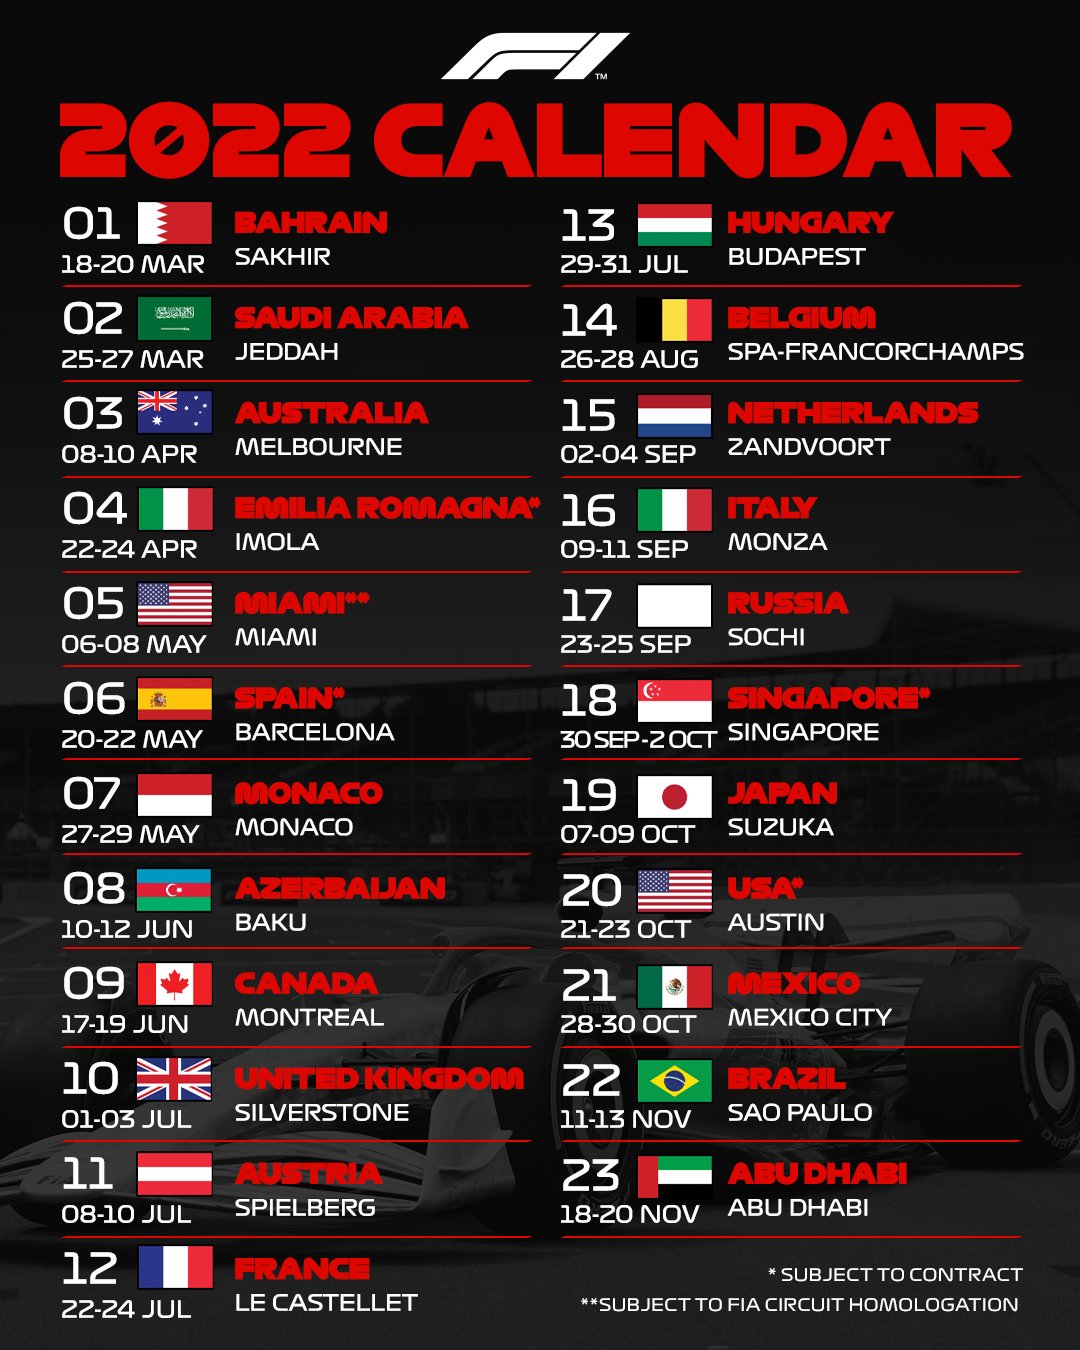 Lurk Sophisticated irregular Twitter 上的Formula 1："The 2022 #F1 calendar is here! 🙌 A record-breaking 23  races 🏅 A brand new grand prix in Miami 💜 Australia, Canada, Singapore  and Japan all return 👌 https://t.co/khq5lAF1IR" /